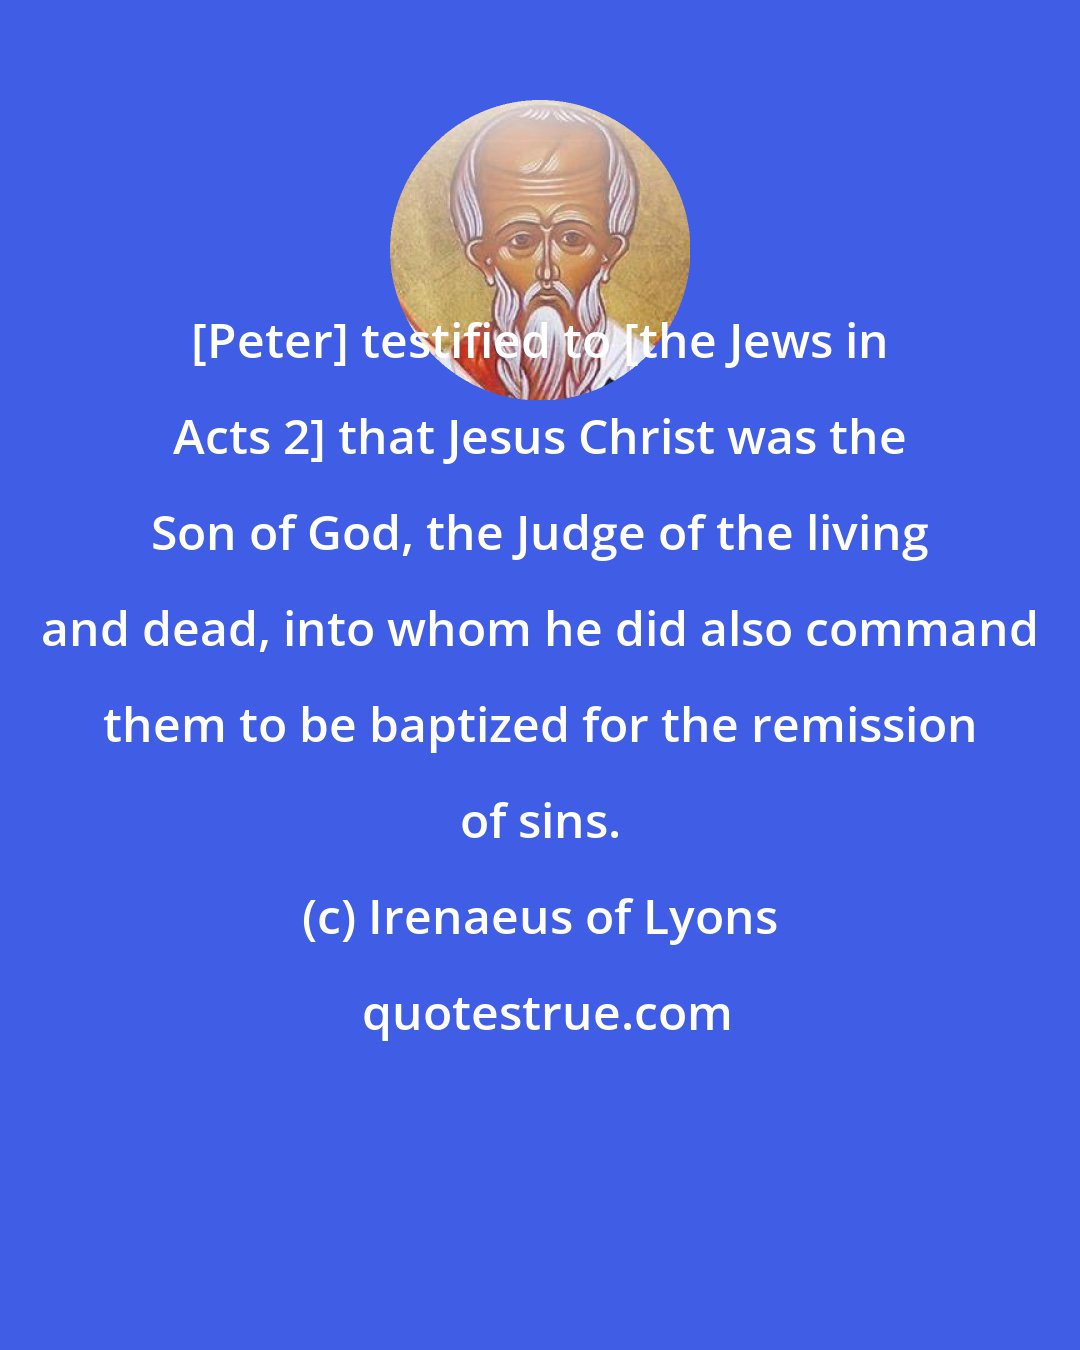 Irenaeus of Lyons: [Peter] testified to [the Jews in Acts 2] that Jesus Christ was the Son of God, the Judge of the living and dead, into whom he did also command them to be baptized for the remission of sins.